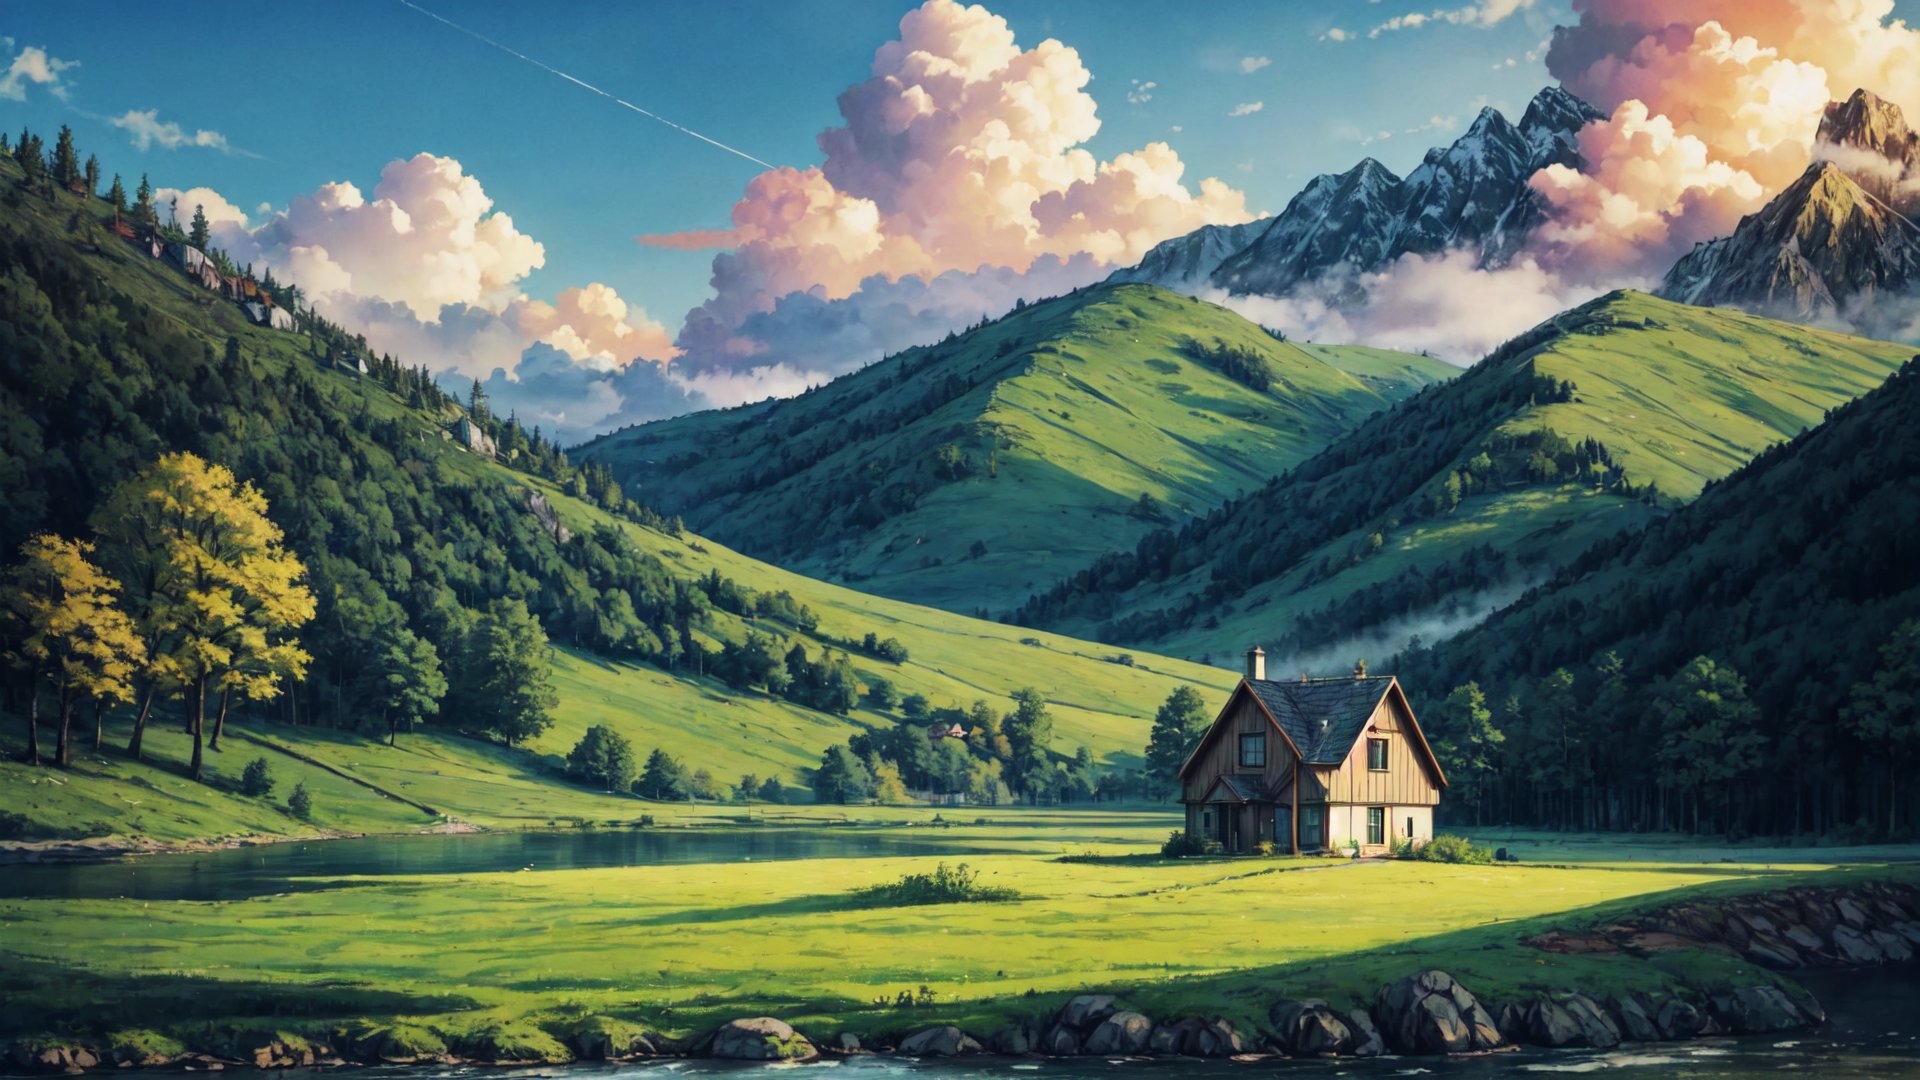 masterpiece, best quality, high quality, with a small house,Cloud,Sky,Ecoregion,Green,Natural landscape,World,Nature,forest,Highland, plant, birds, scenery, day time, lofi style